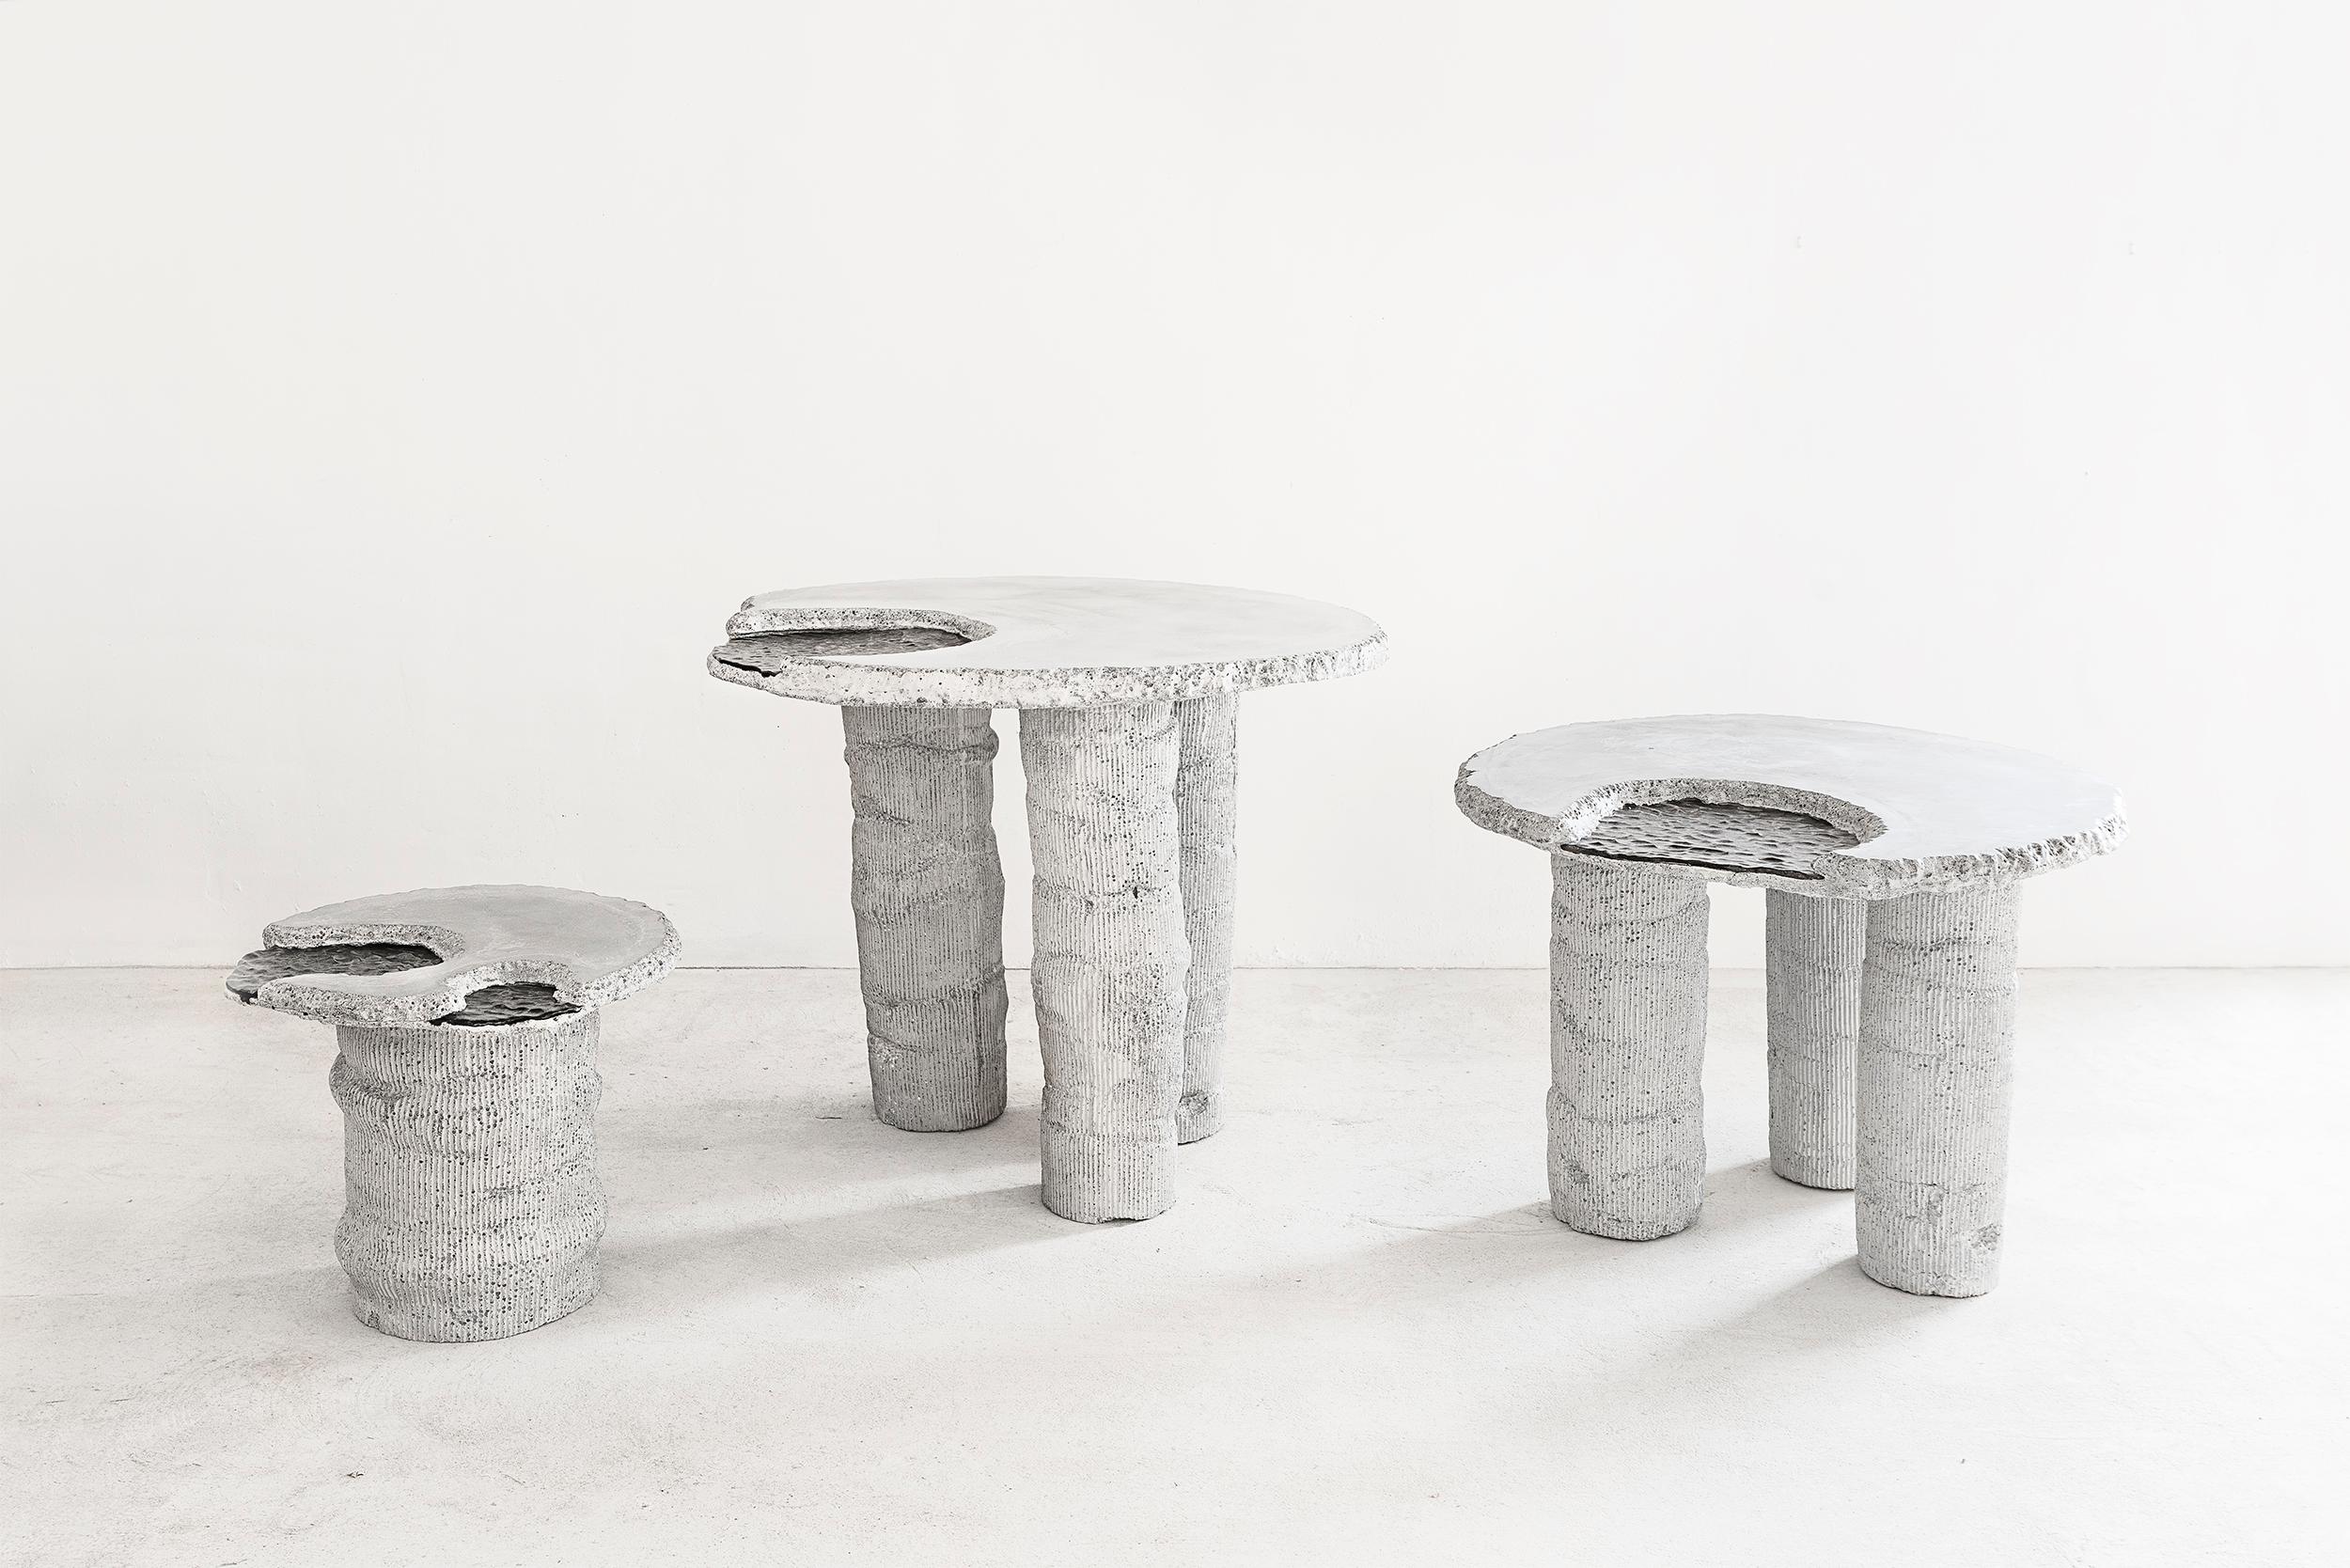 Rodrigo Pinto
Side table 2
From the series “Tierras Hipnóticas” (Hypnopompic lands)
Manufactured by Rodrigo Pinto
Santiago de Chile, 2020
Produced in exclusive for Side Gallery
Concrete consisting of marble grains, stone carbonates, copper